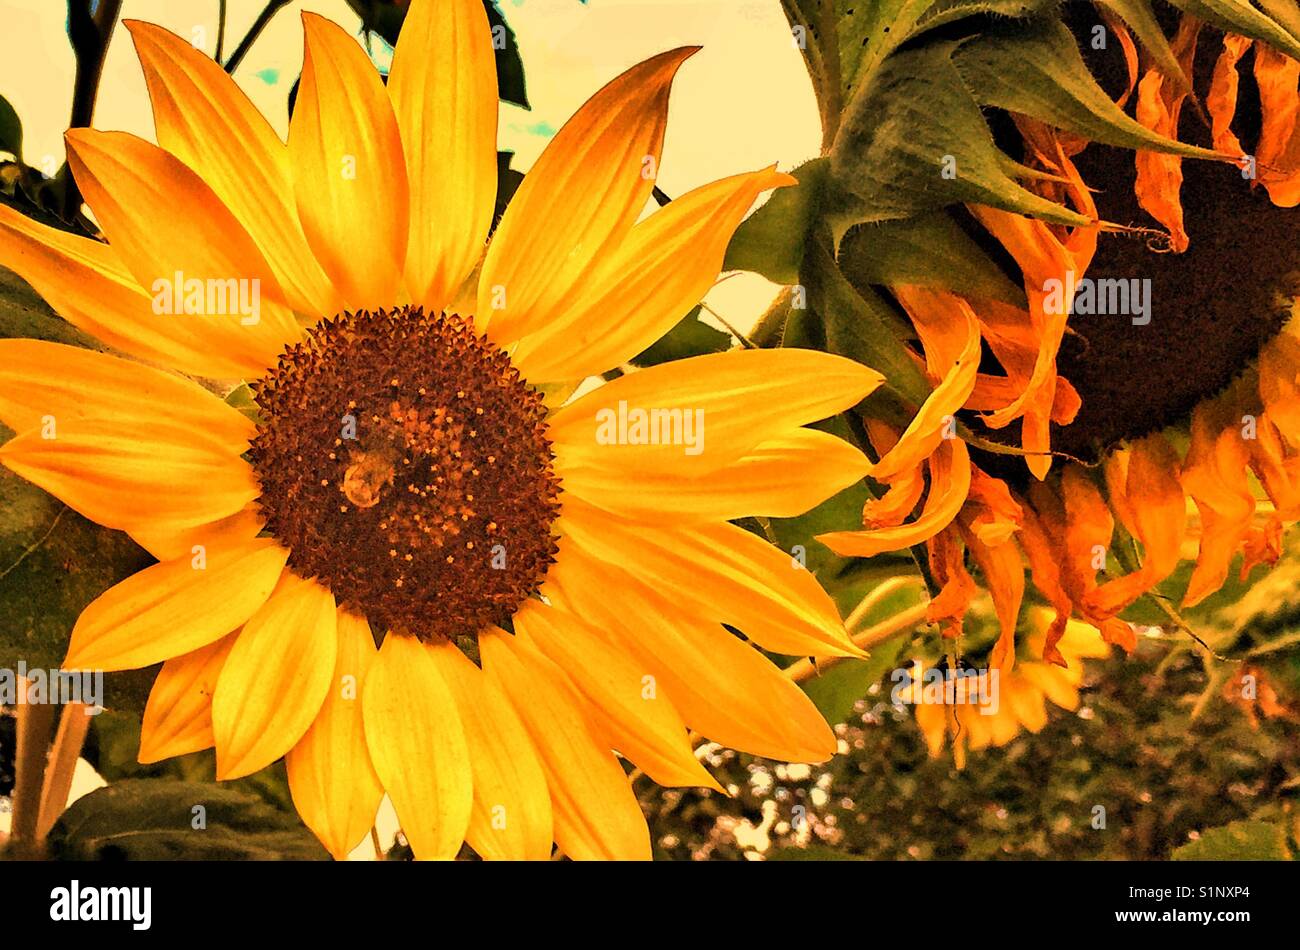 Rustic Autumn sunflowers, deep golds, aged yellows Stock Photo